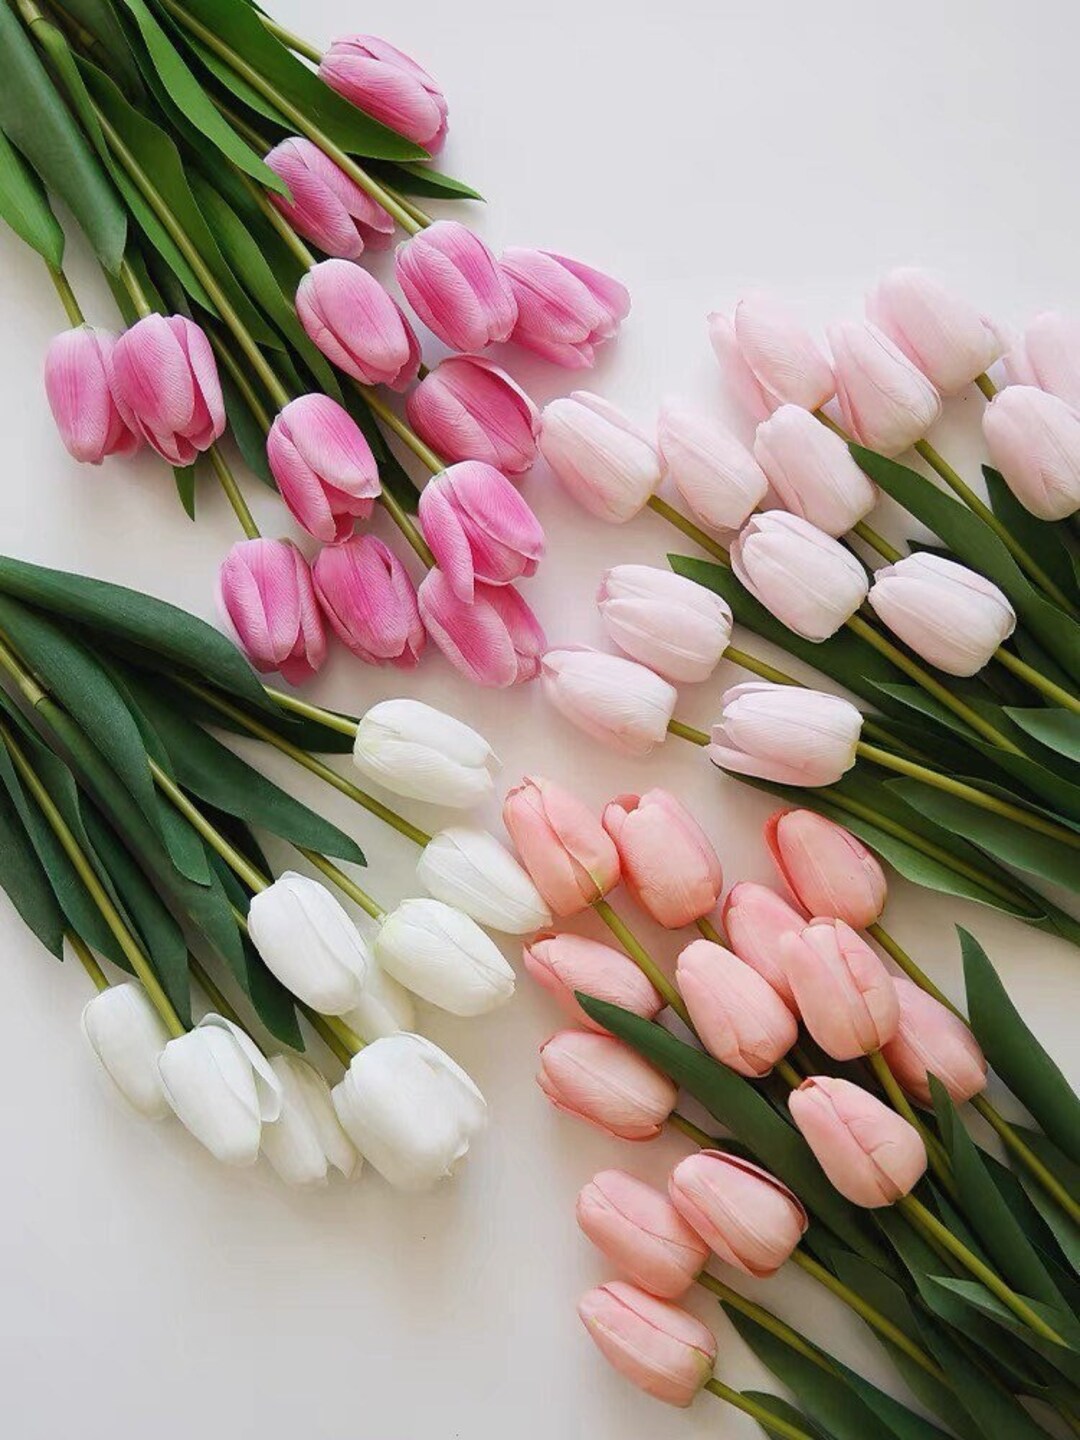 Tulip Flowers Tulips Real Touch Tulips Artificial Flowers Floral Stems  Artificial Tulips P 